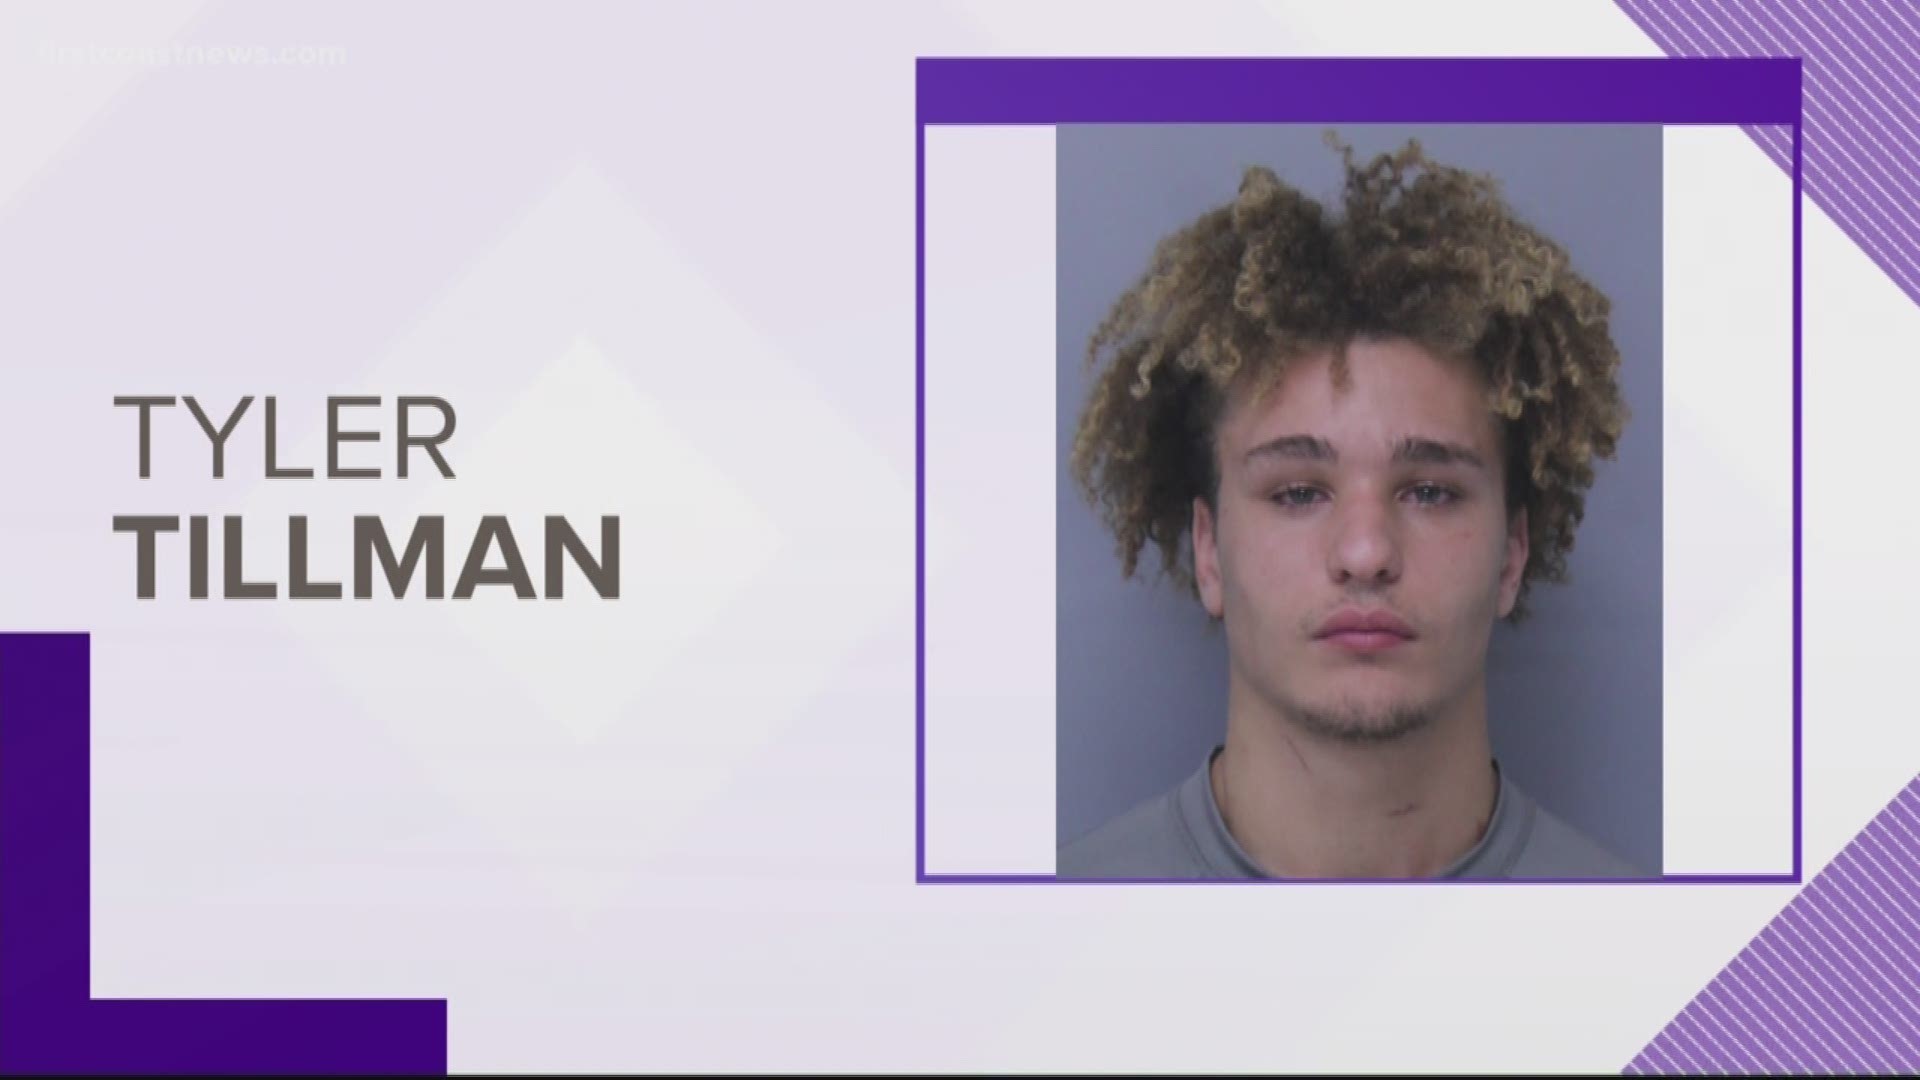 A teen is facing multiple charges, including sexual battery of a minor under 18 after he was accused of raping a 15-year-old girl Wednesday at a St. Johns County pool.